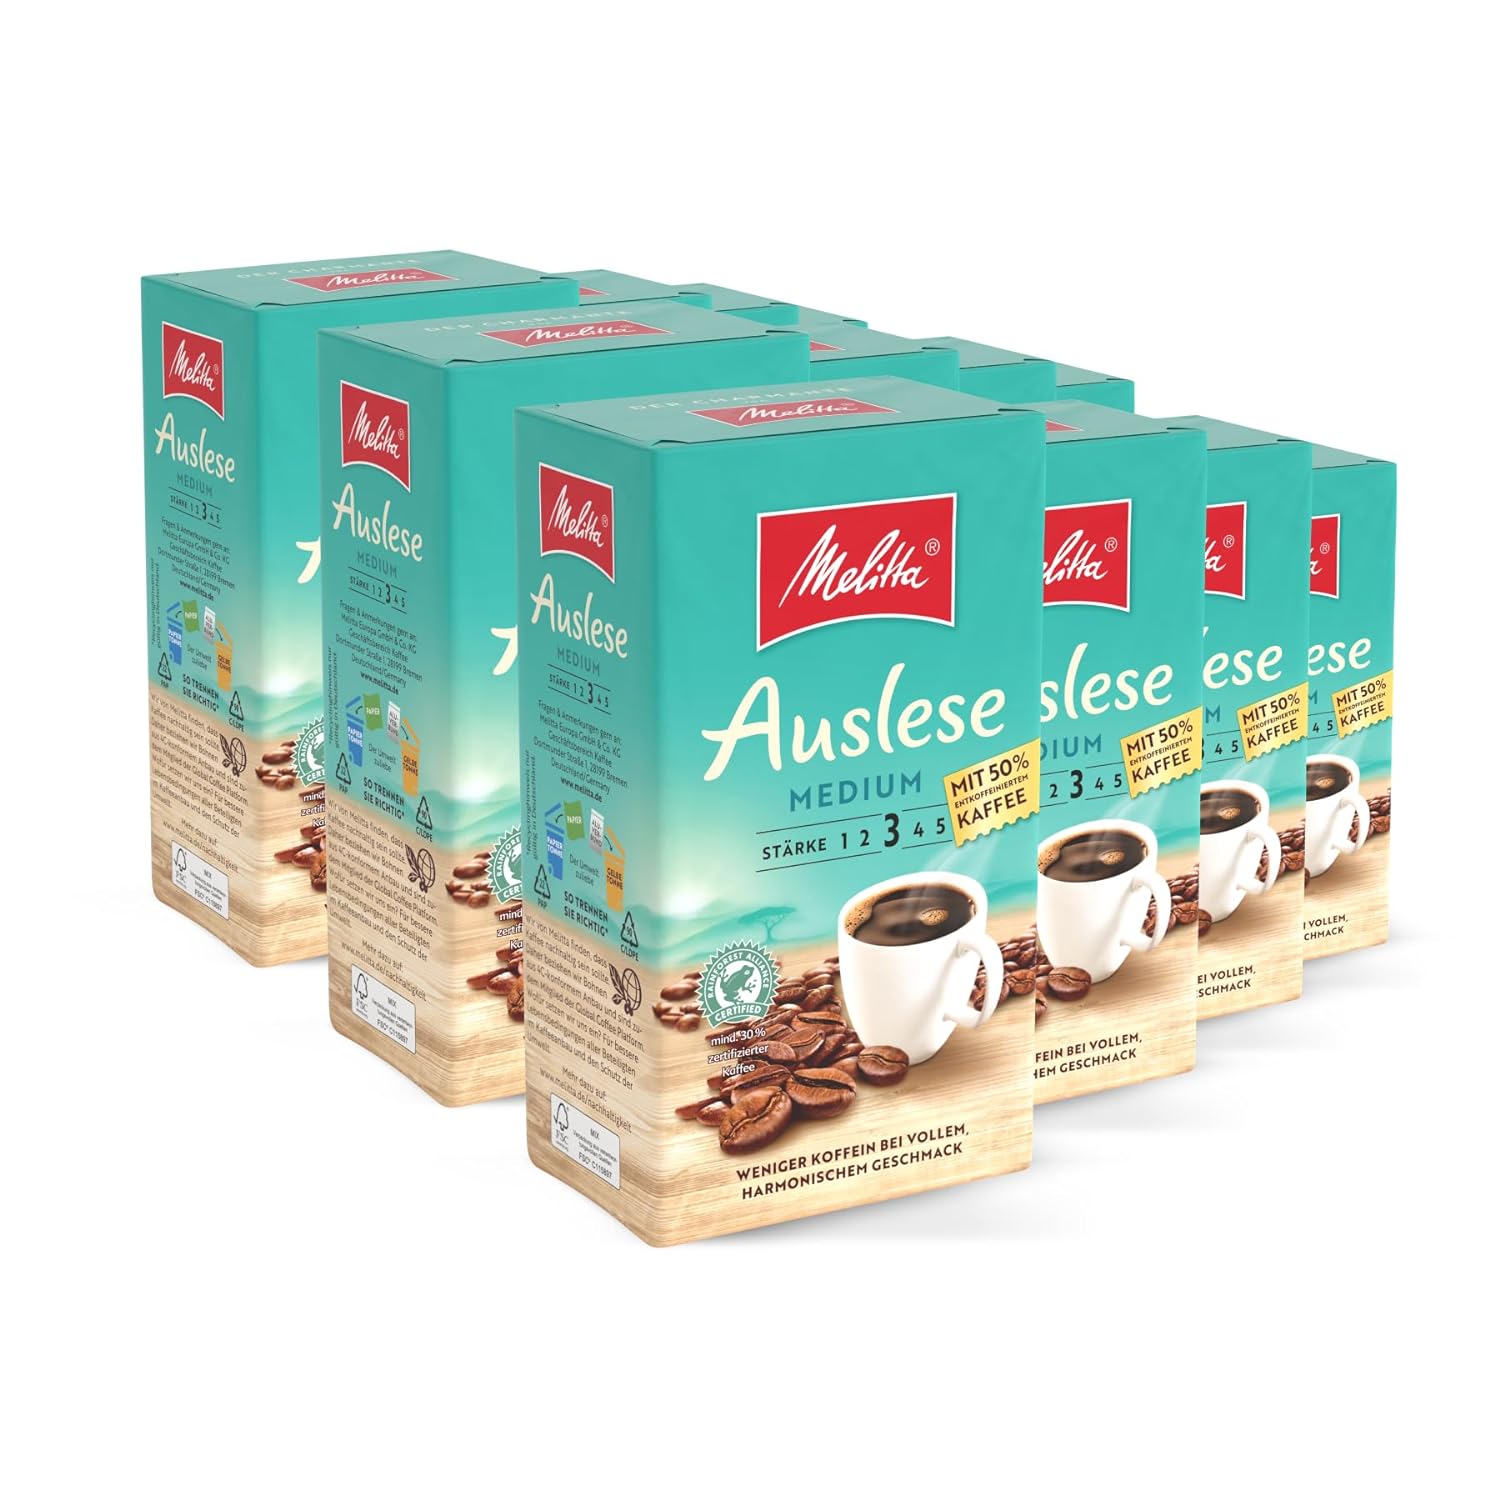 Melitta Auslese Medium Filter Coffee 12 x 500 g, Ground, Powder for Filter Coffee Machines, 50% Decaffeinated Coffee, Medium Roast, Roasted in Germany, in Tray